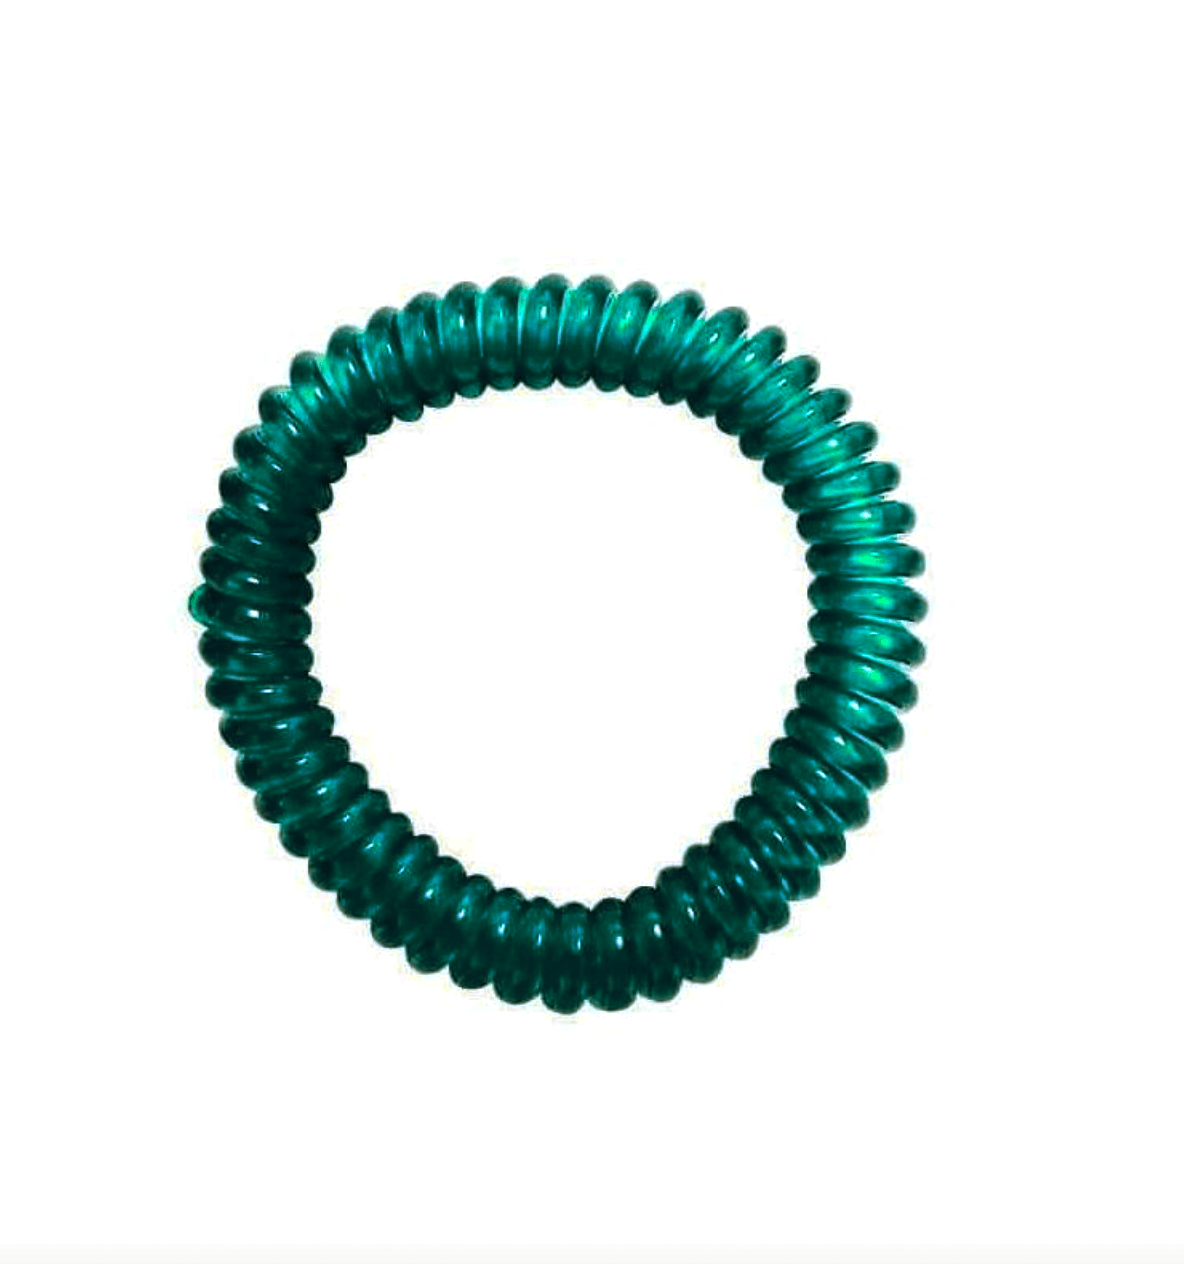 Springz Chew Bracelet- Clear Teal Green Color